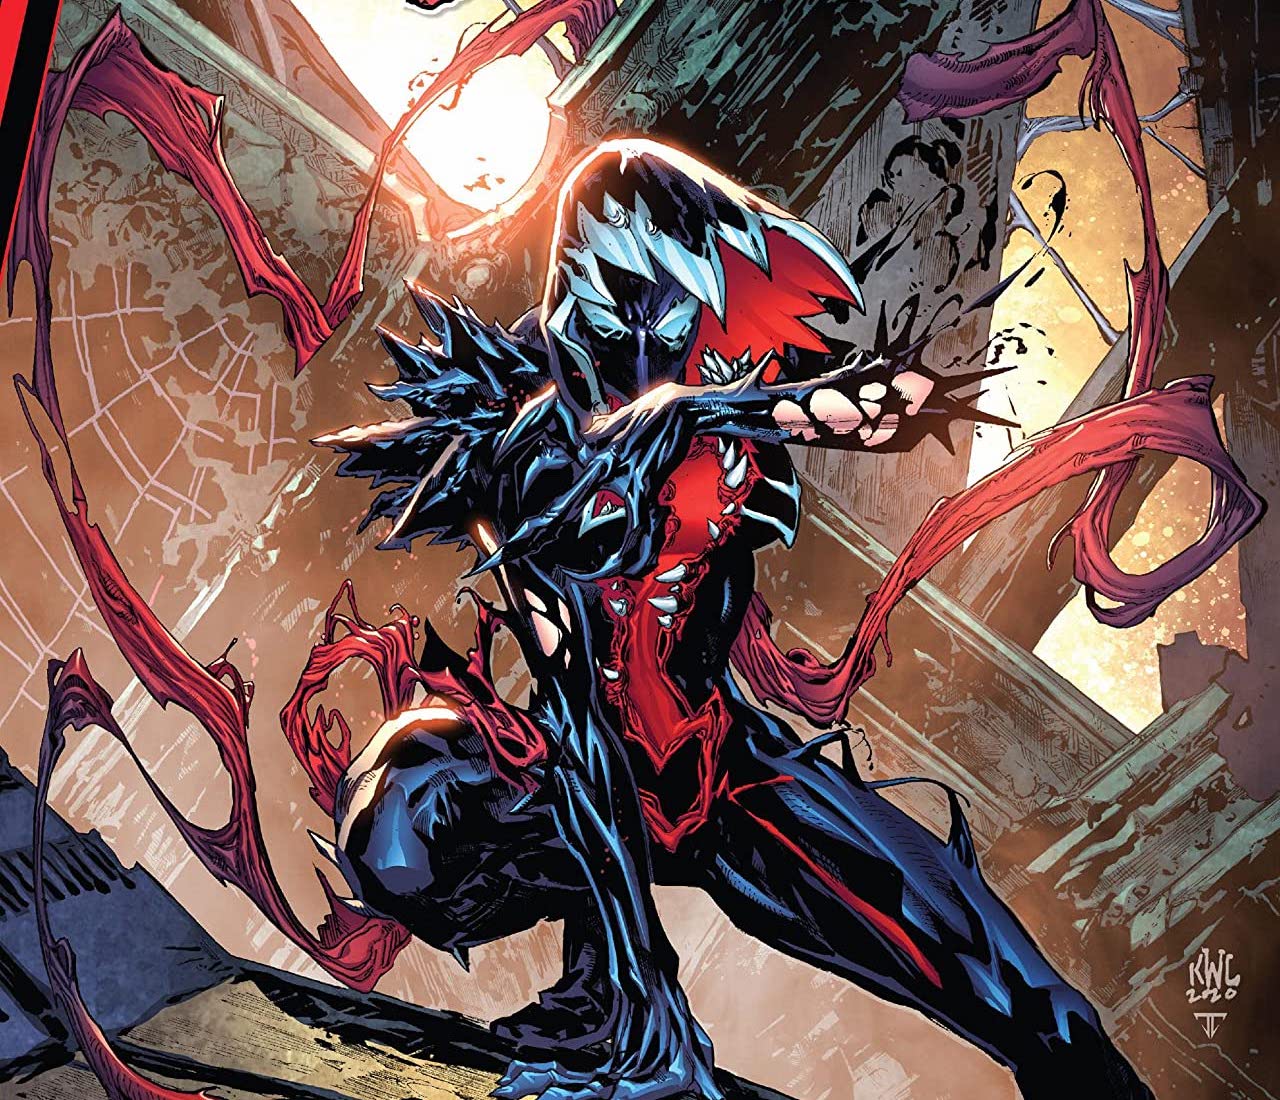 EXCLUSIVE Marvel Preview: King In Black: Gwenom vs. Carnage #1